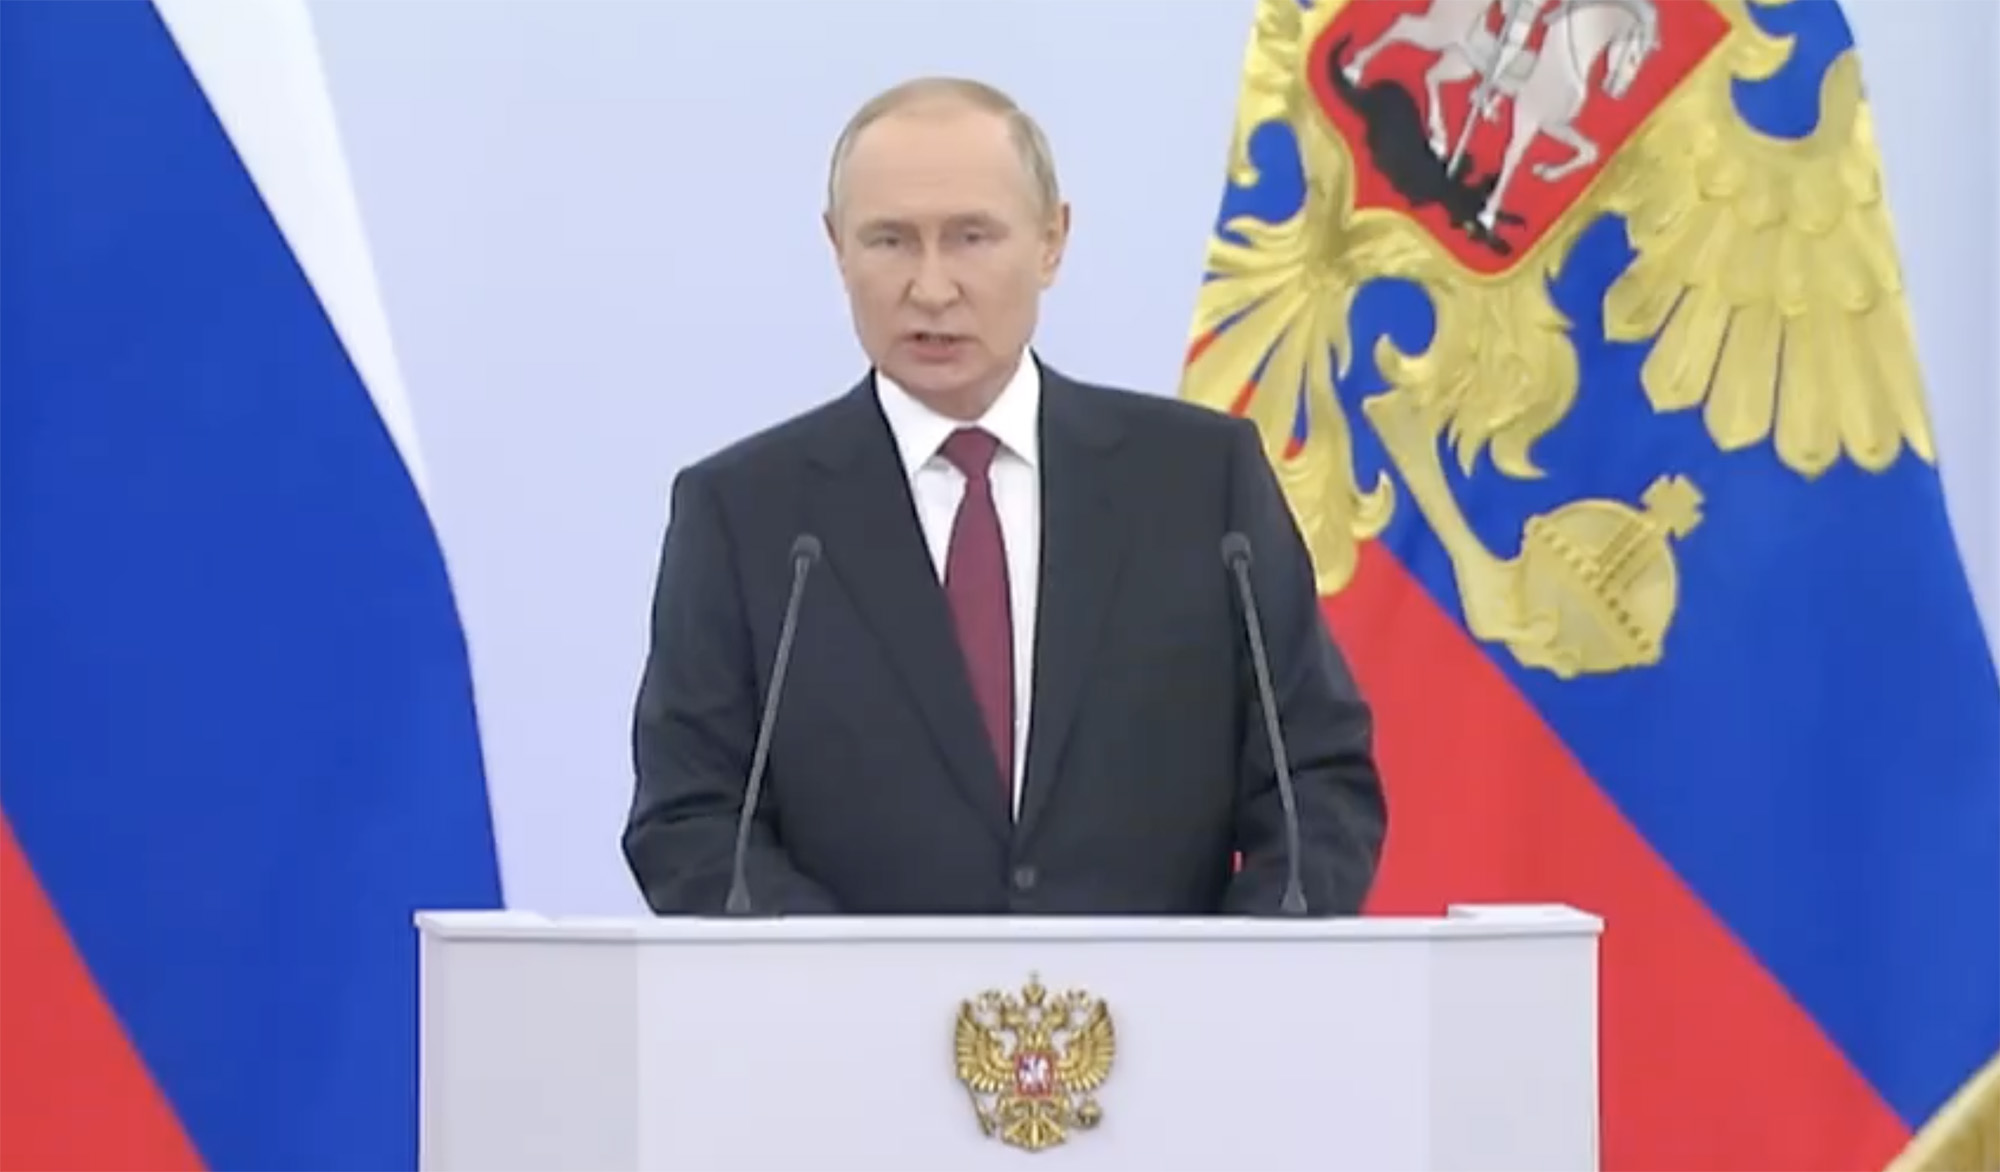 Russian President Vladimir Putin gives a speech in Moscow on September 30.